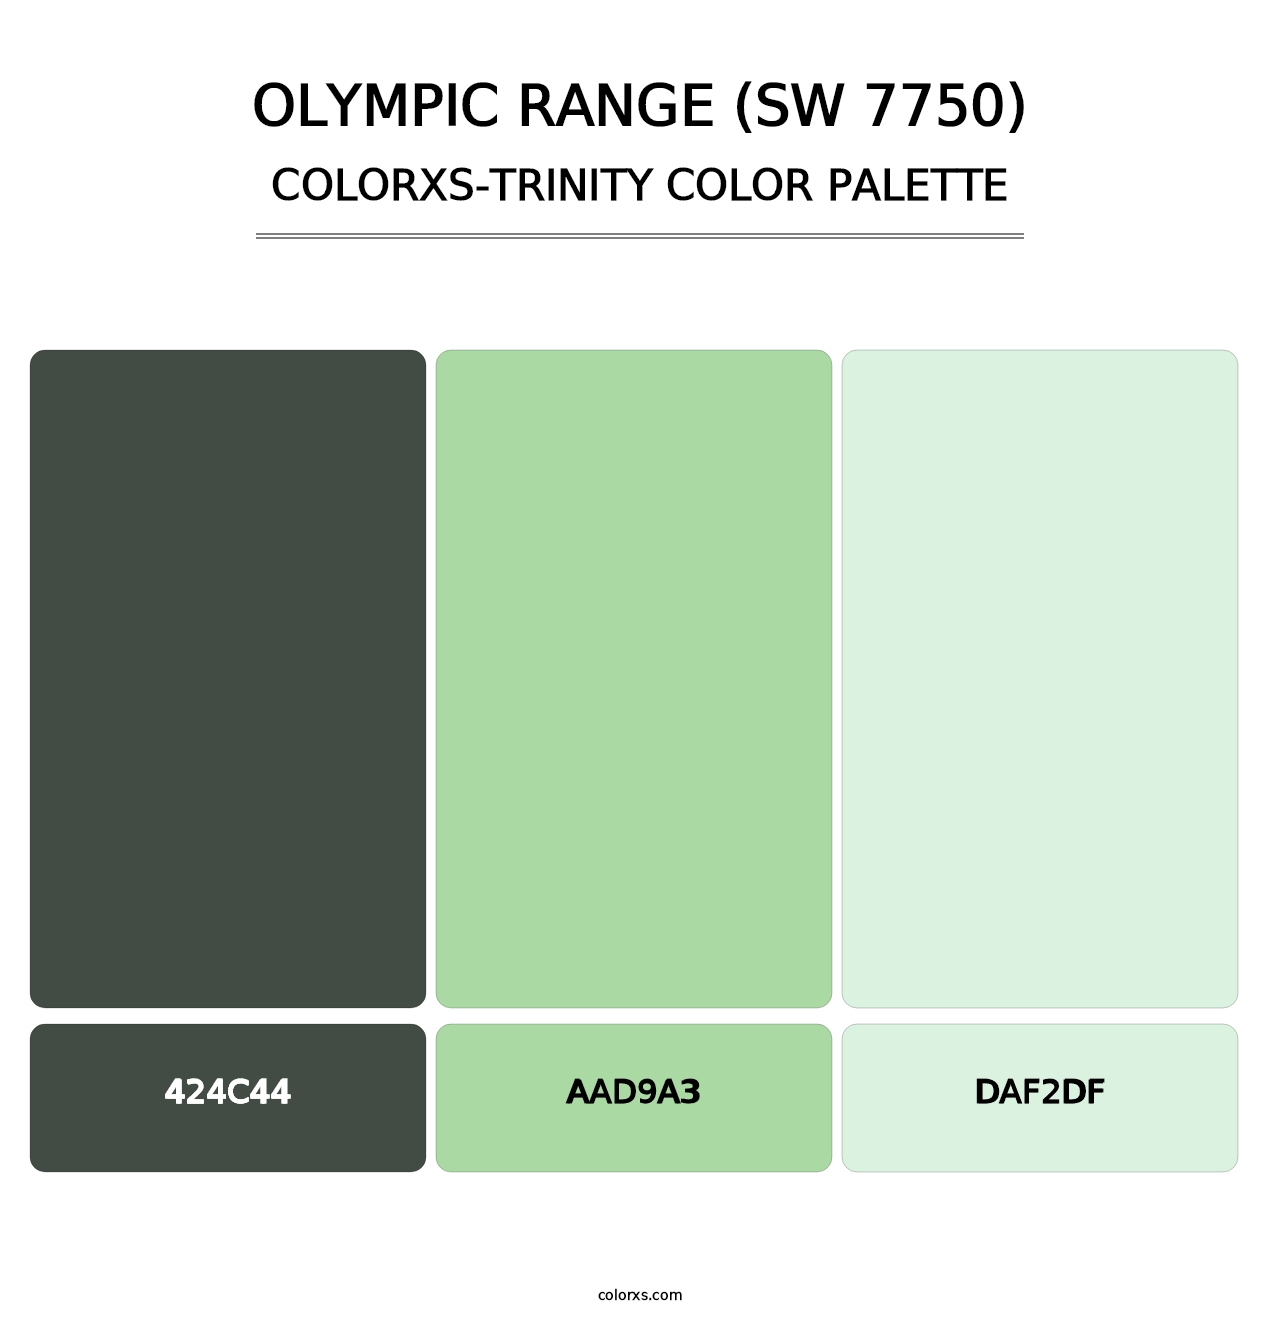 Olympic Range (SW 7750) - Colorxs Trinity Palette